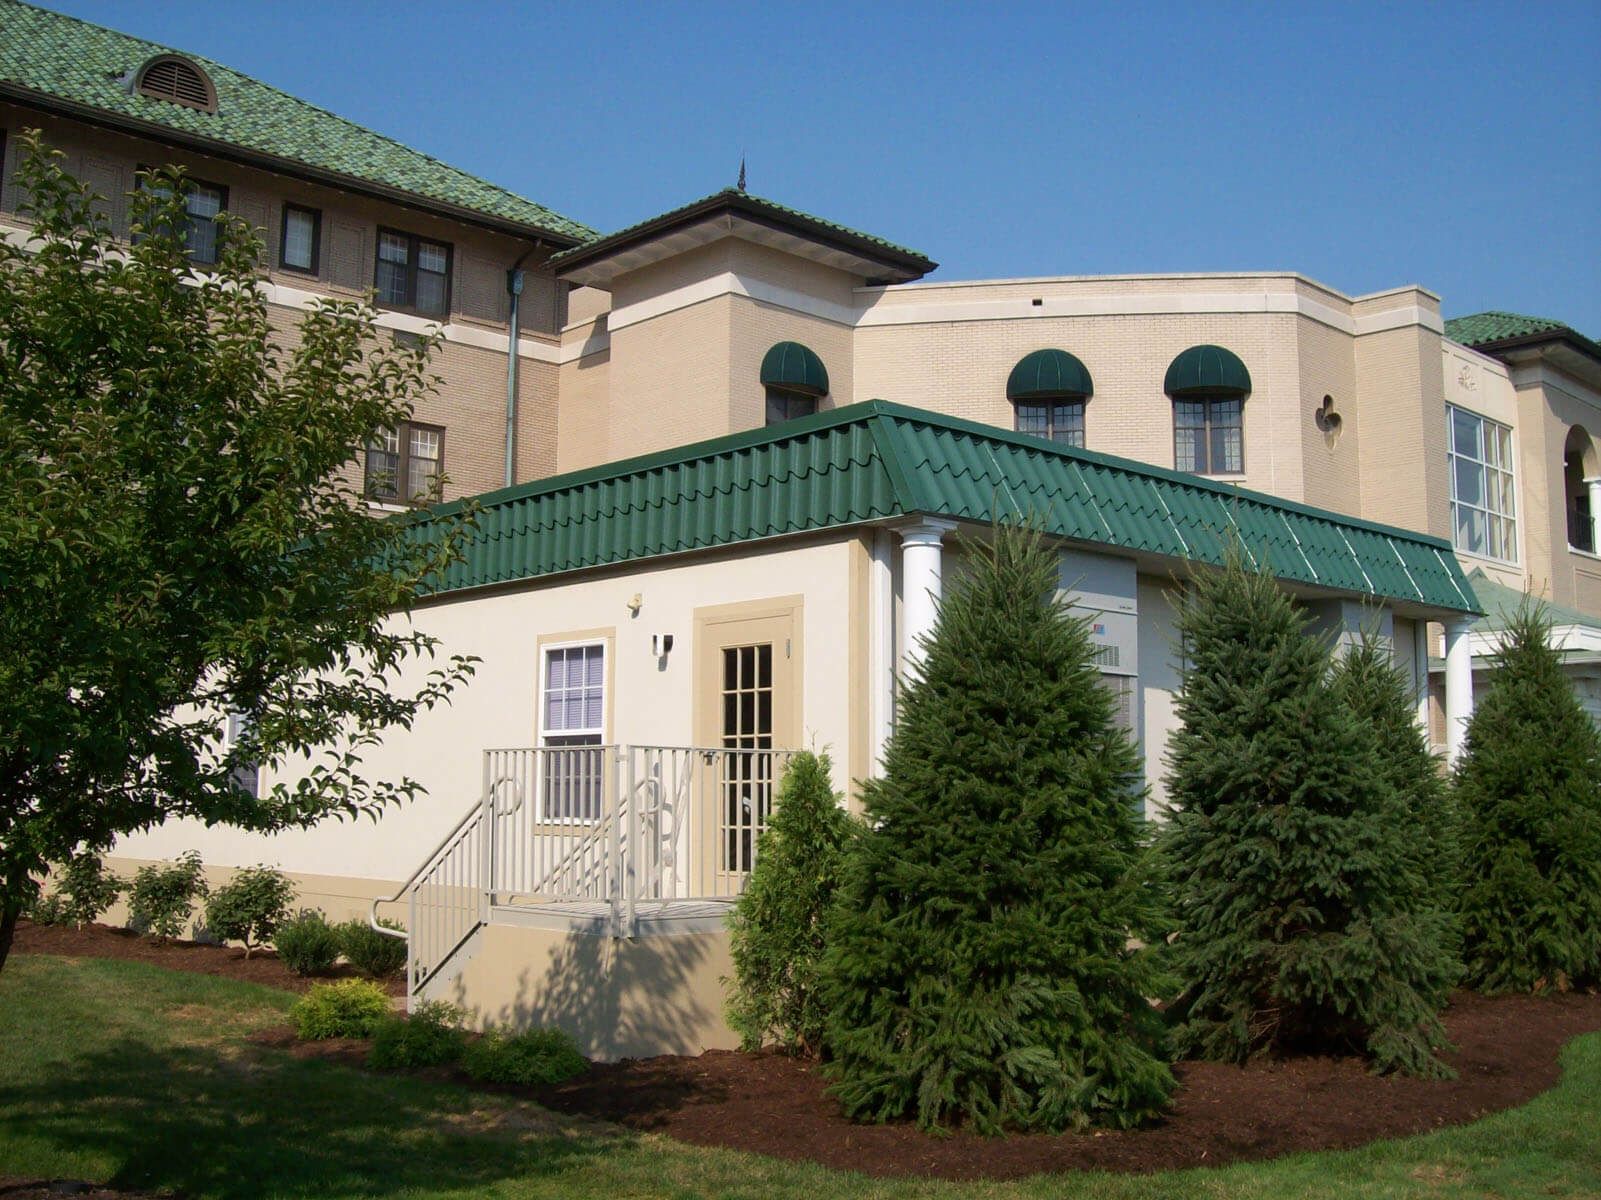 Hotel-Hershey-Temporary-Conference-Center-Exterior-Side-2